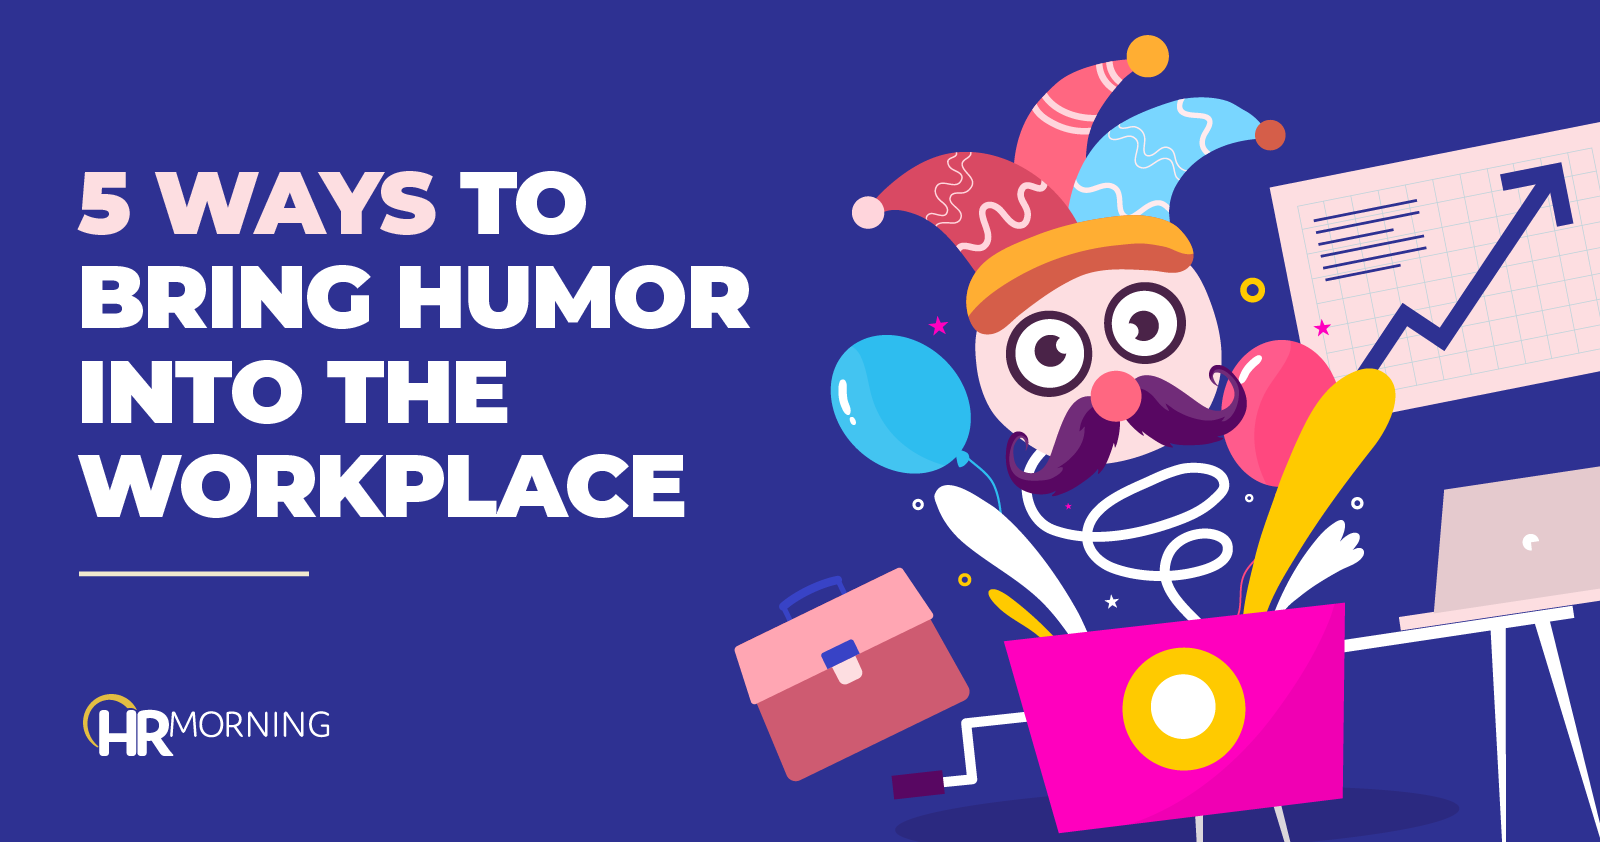 How to effectively & appropriately bring humor into the workplace